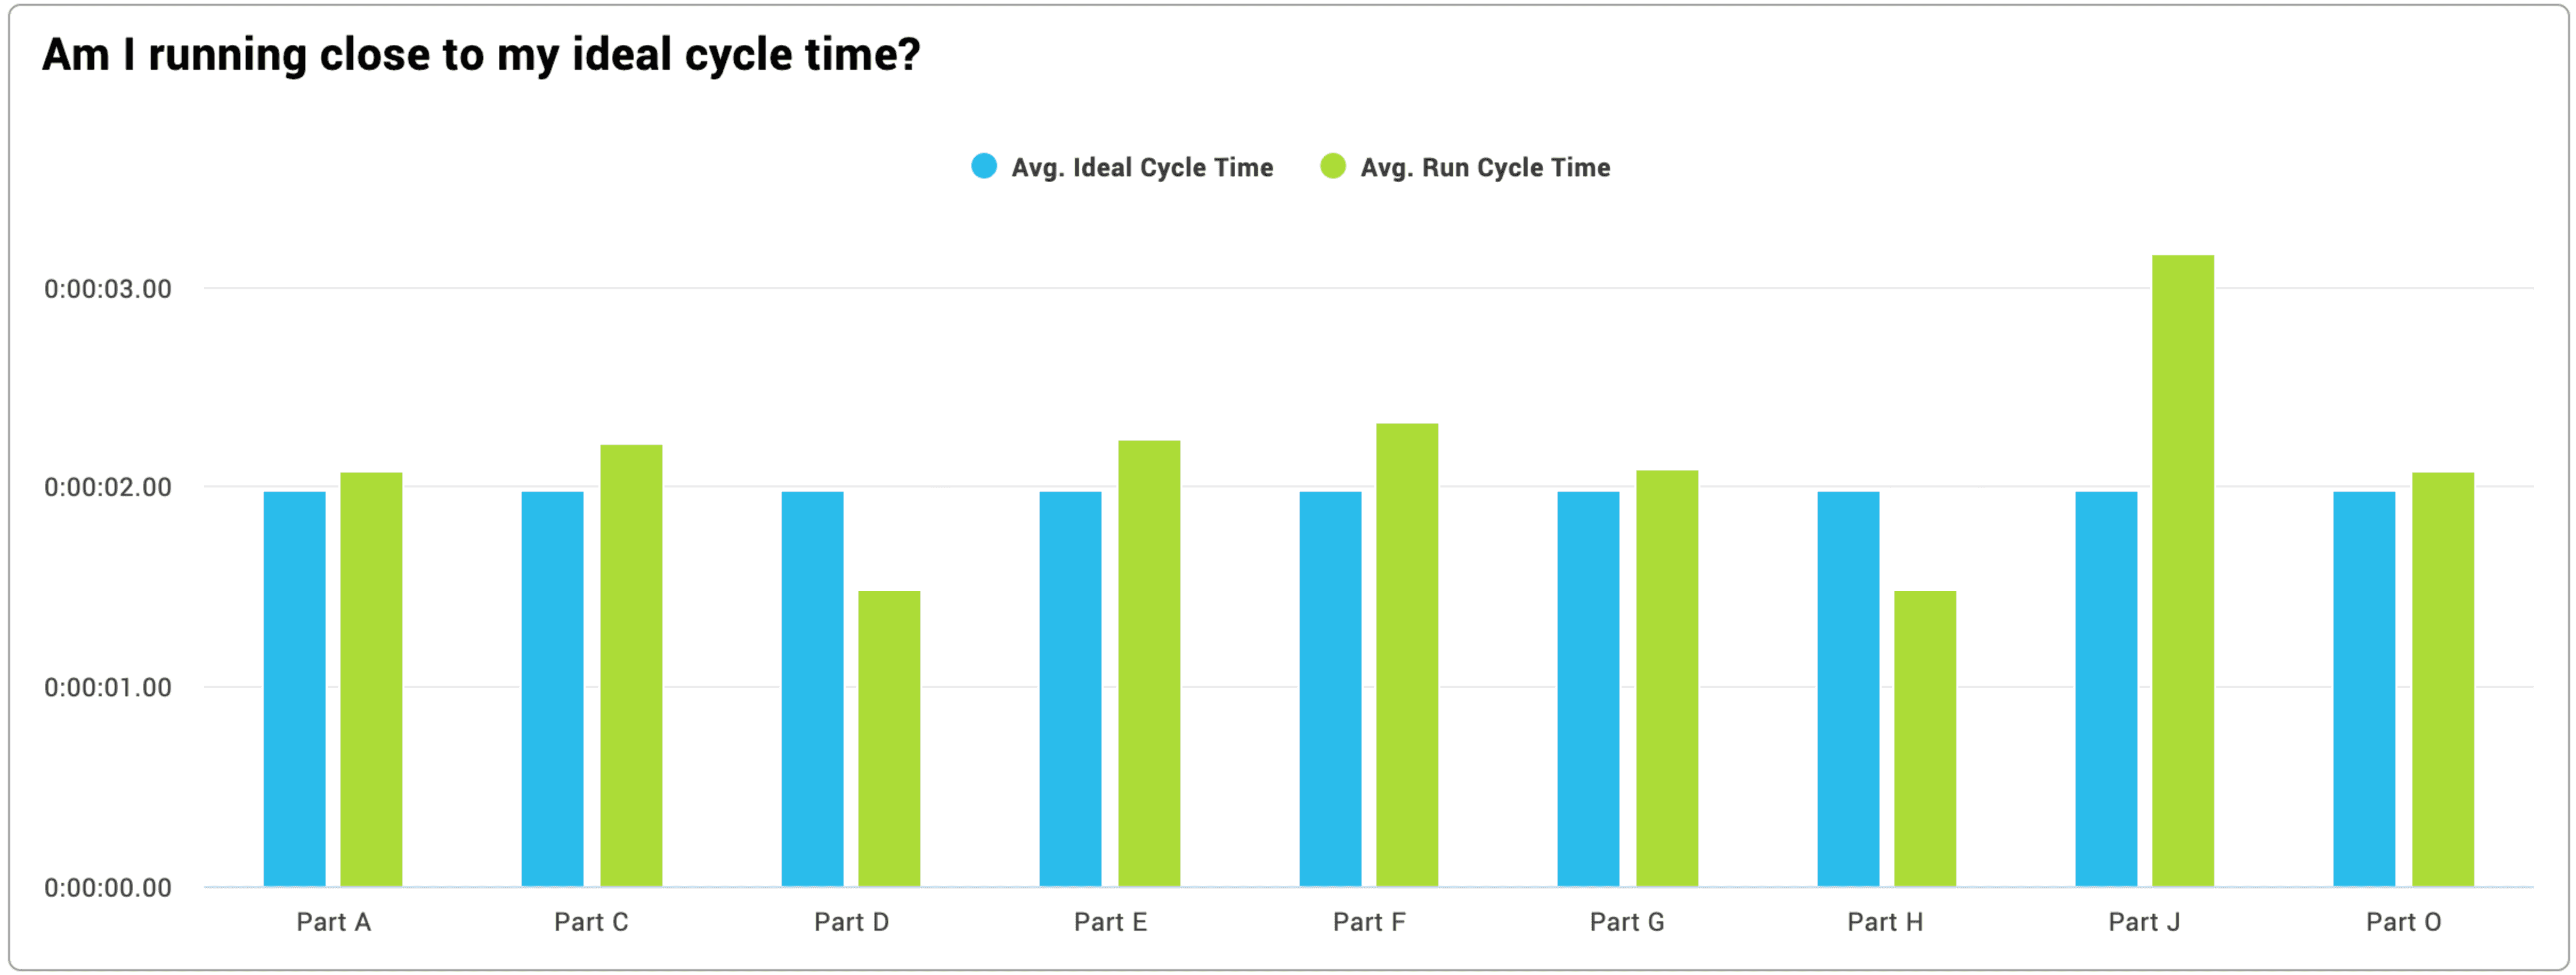 Bar chart showing ideal cycle time and average run cycle time by part.